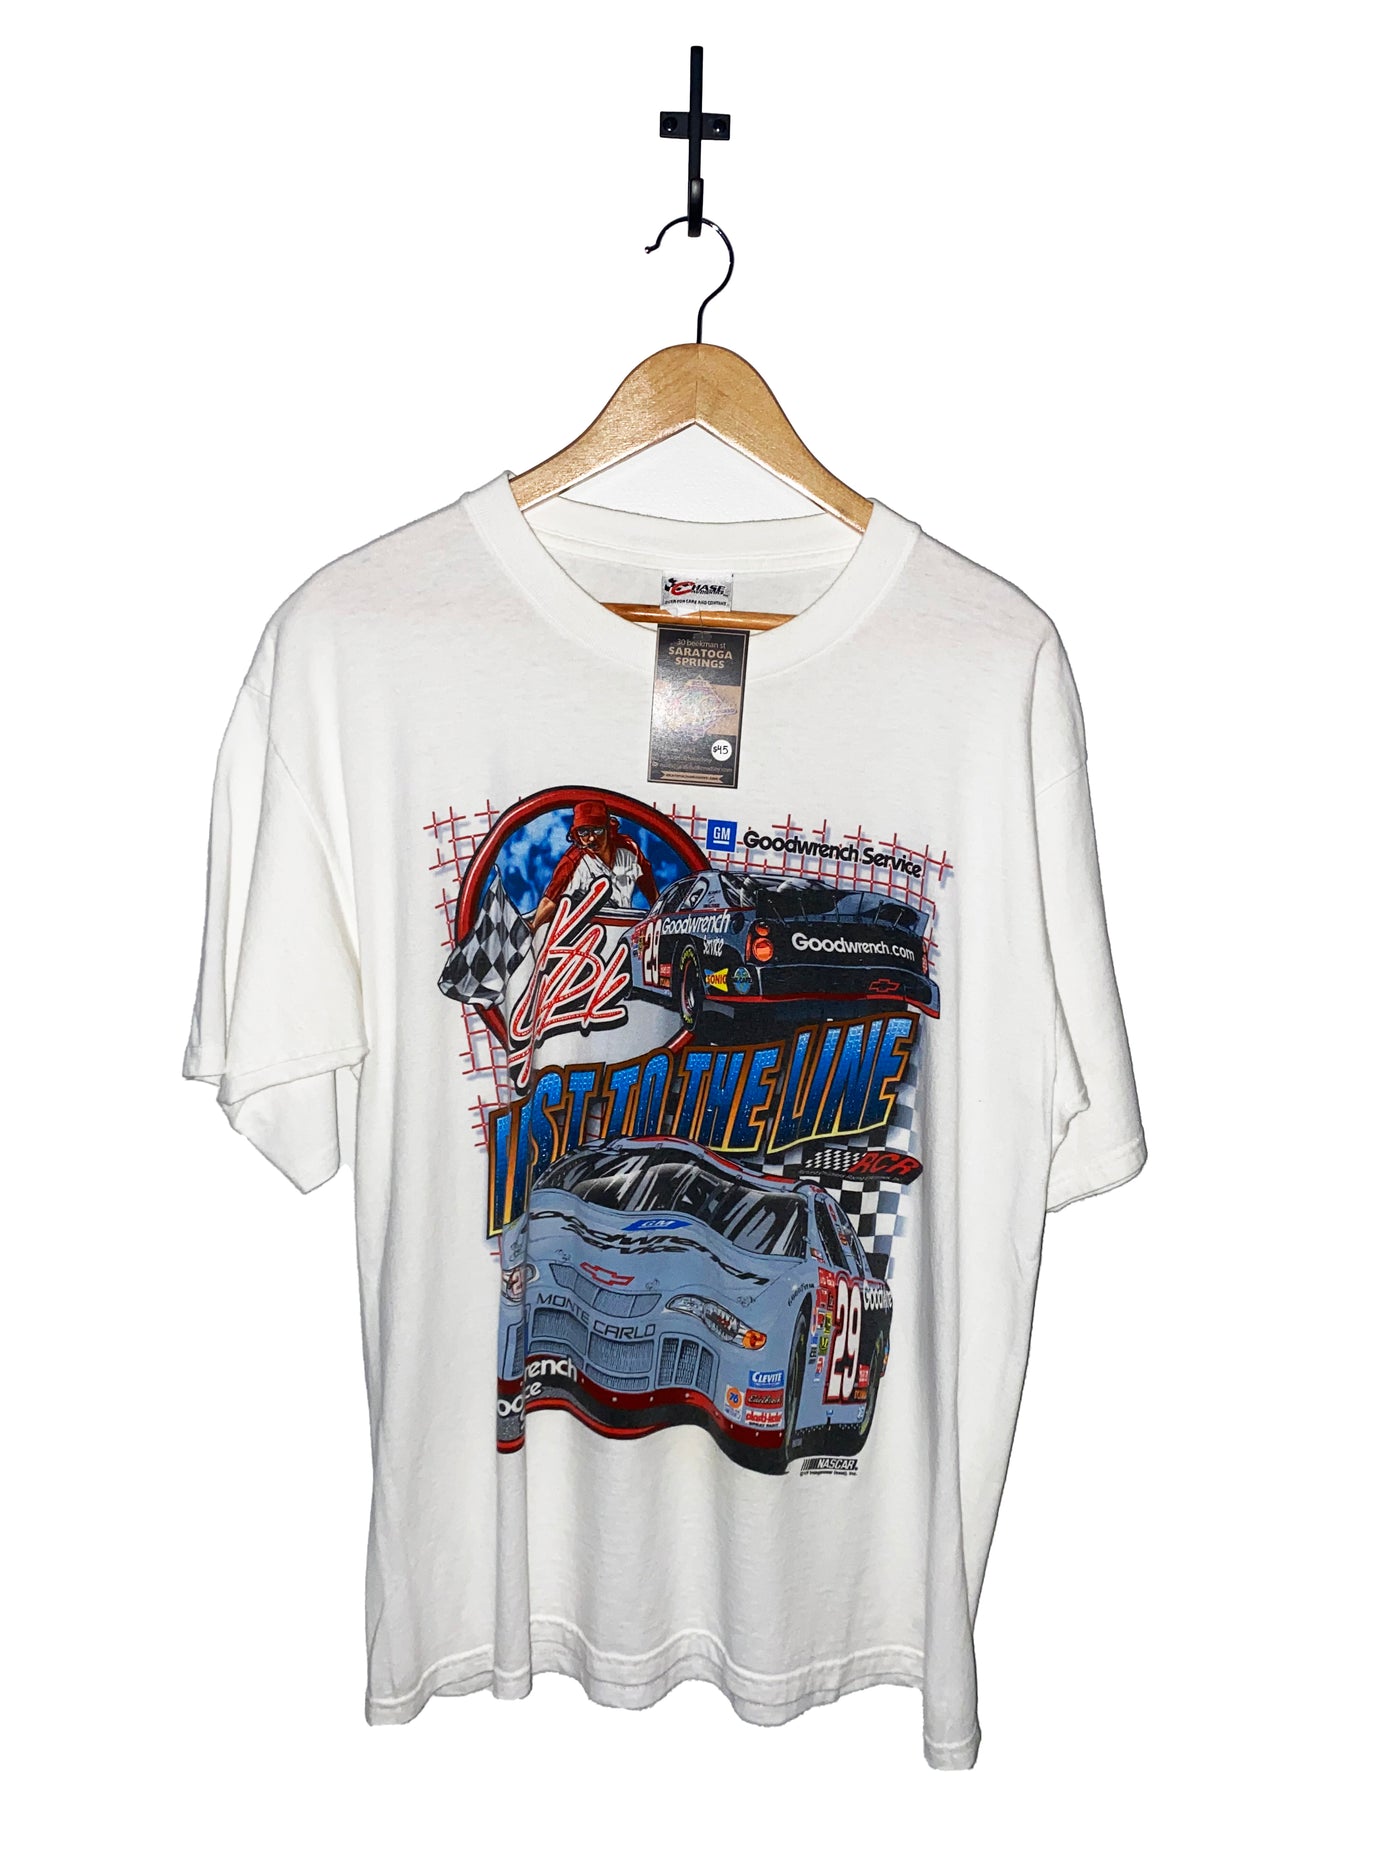 Vintage ‘First to the Line’ Goodwrench Racing T-Shirt